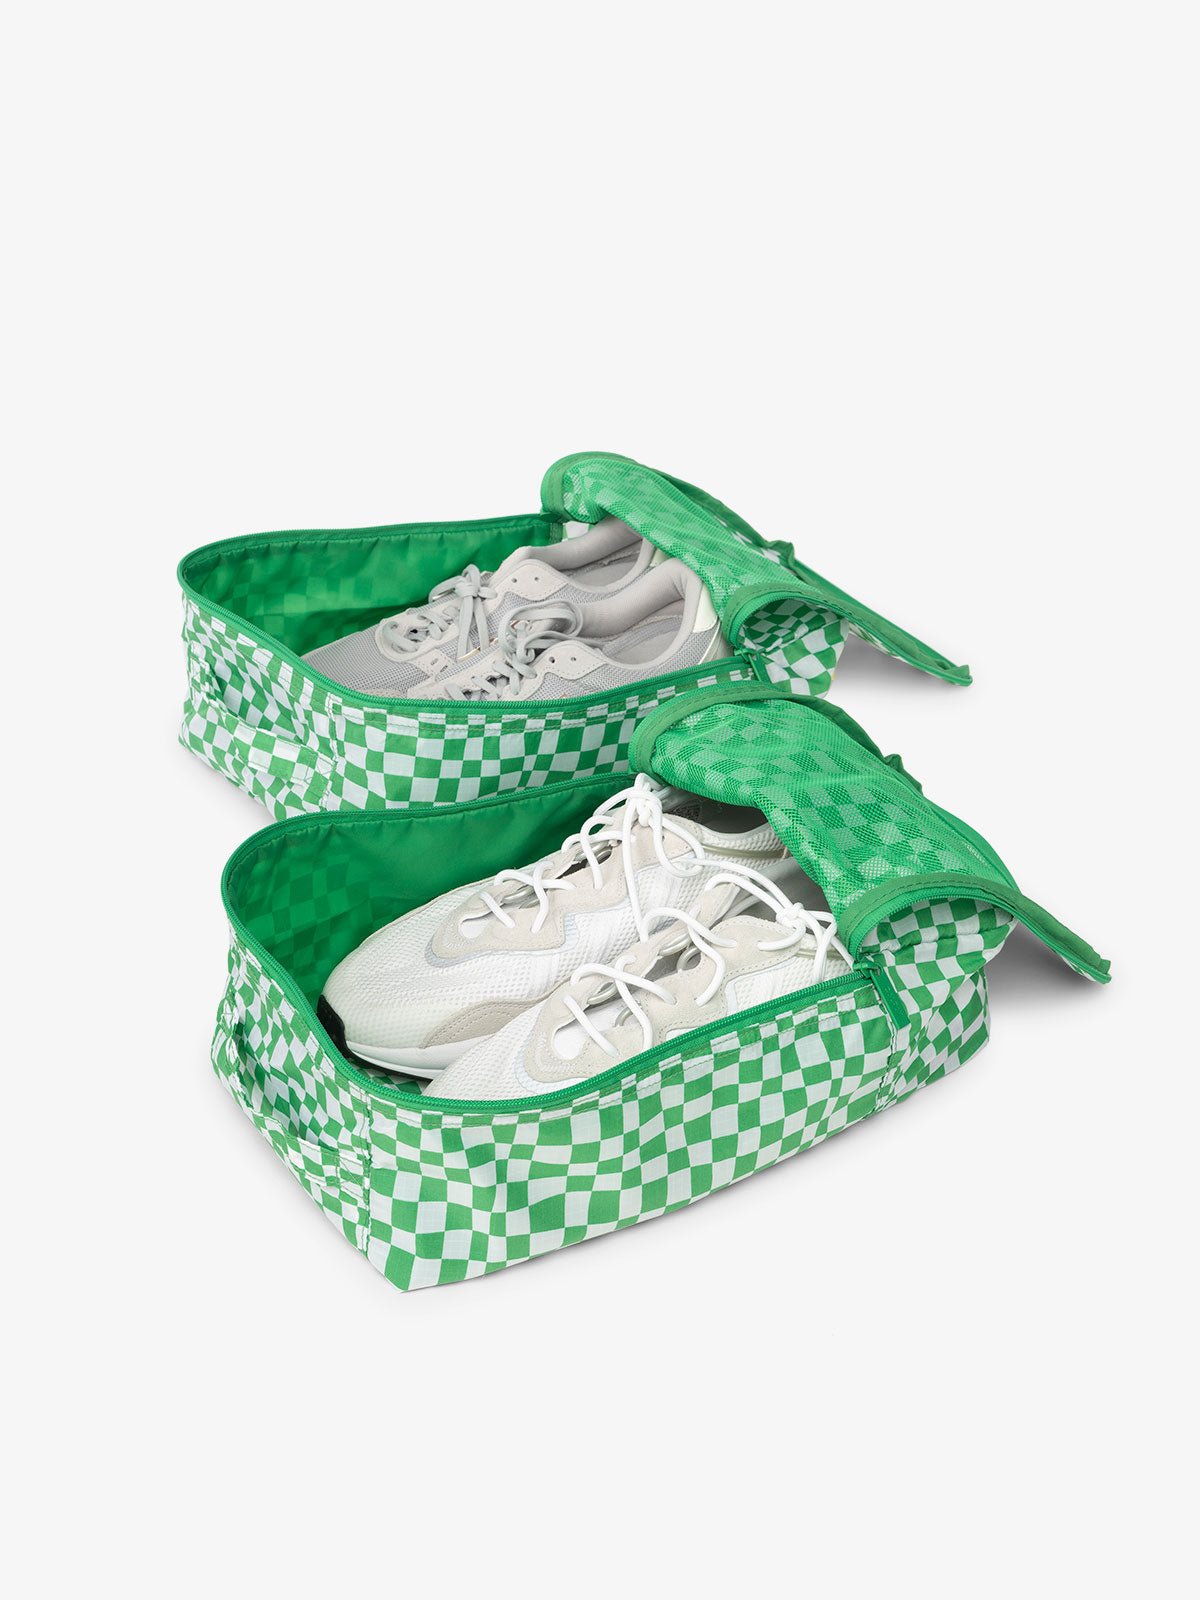 CALPAK Compakt shoe bag set with mesh pockets for travel in green checkerboard print